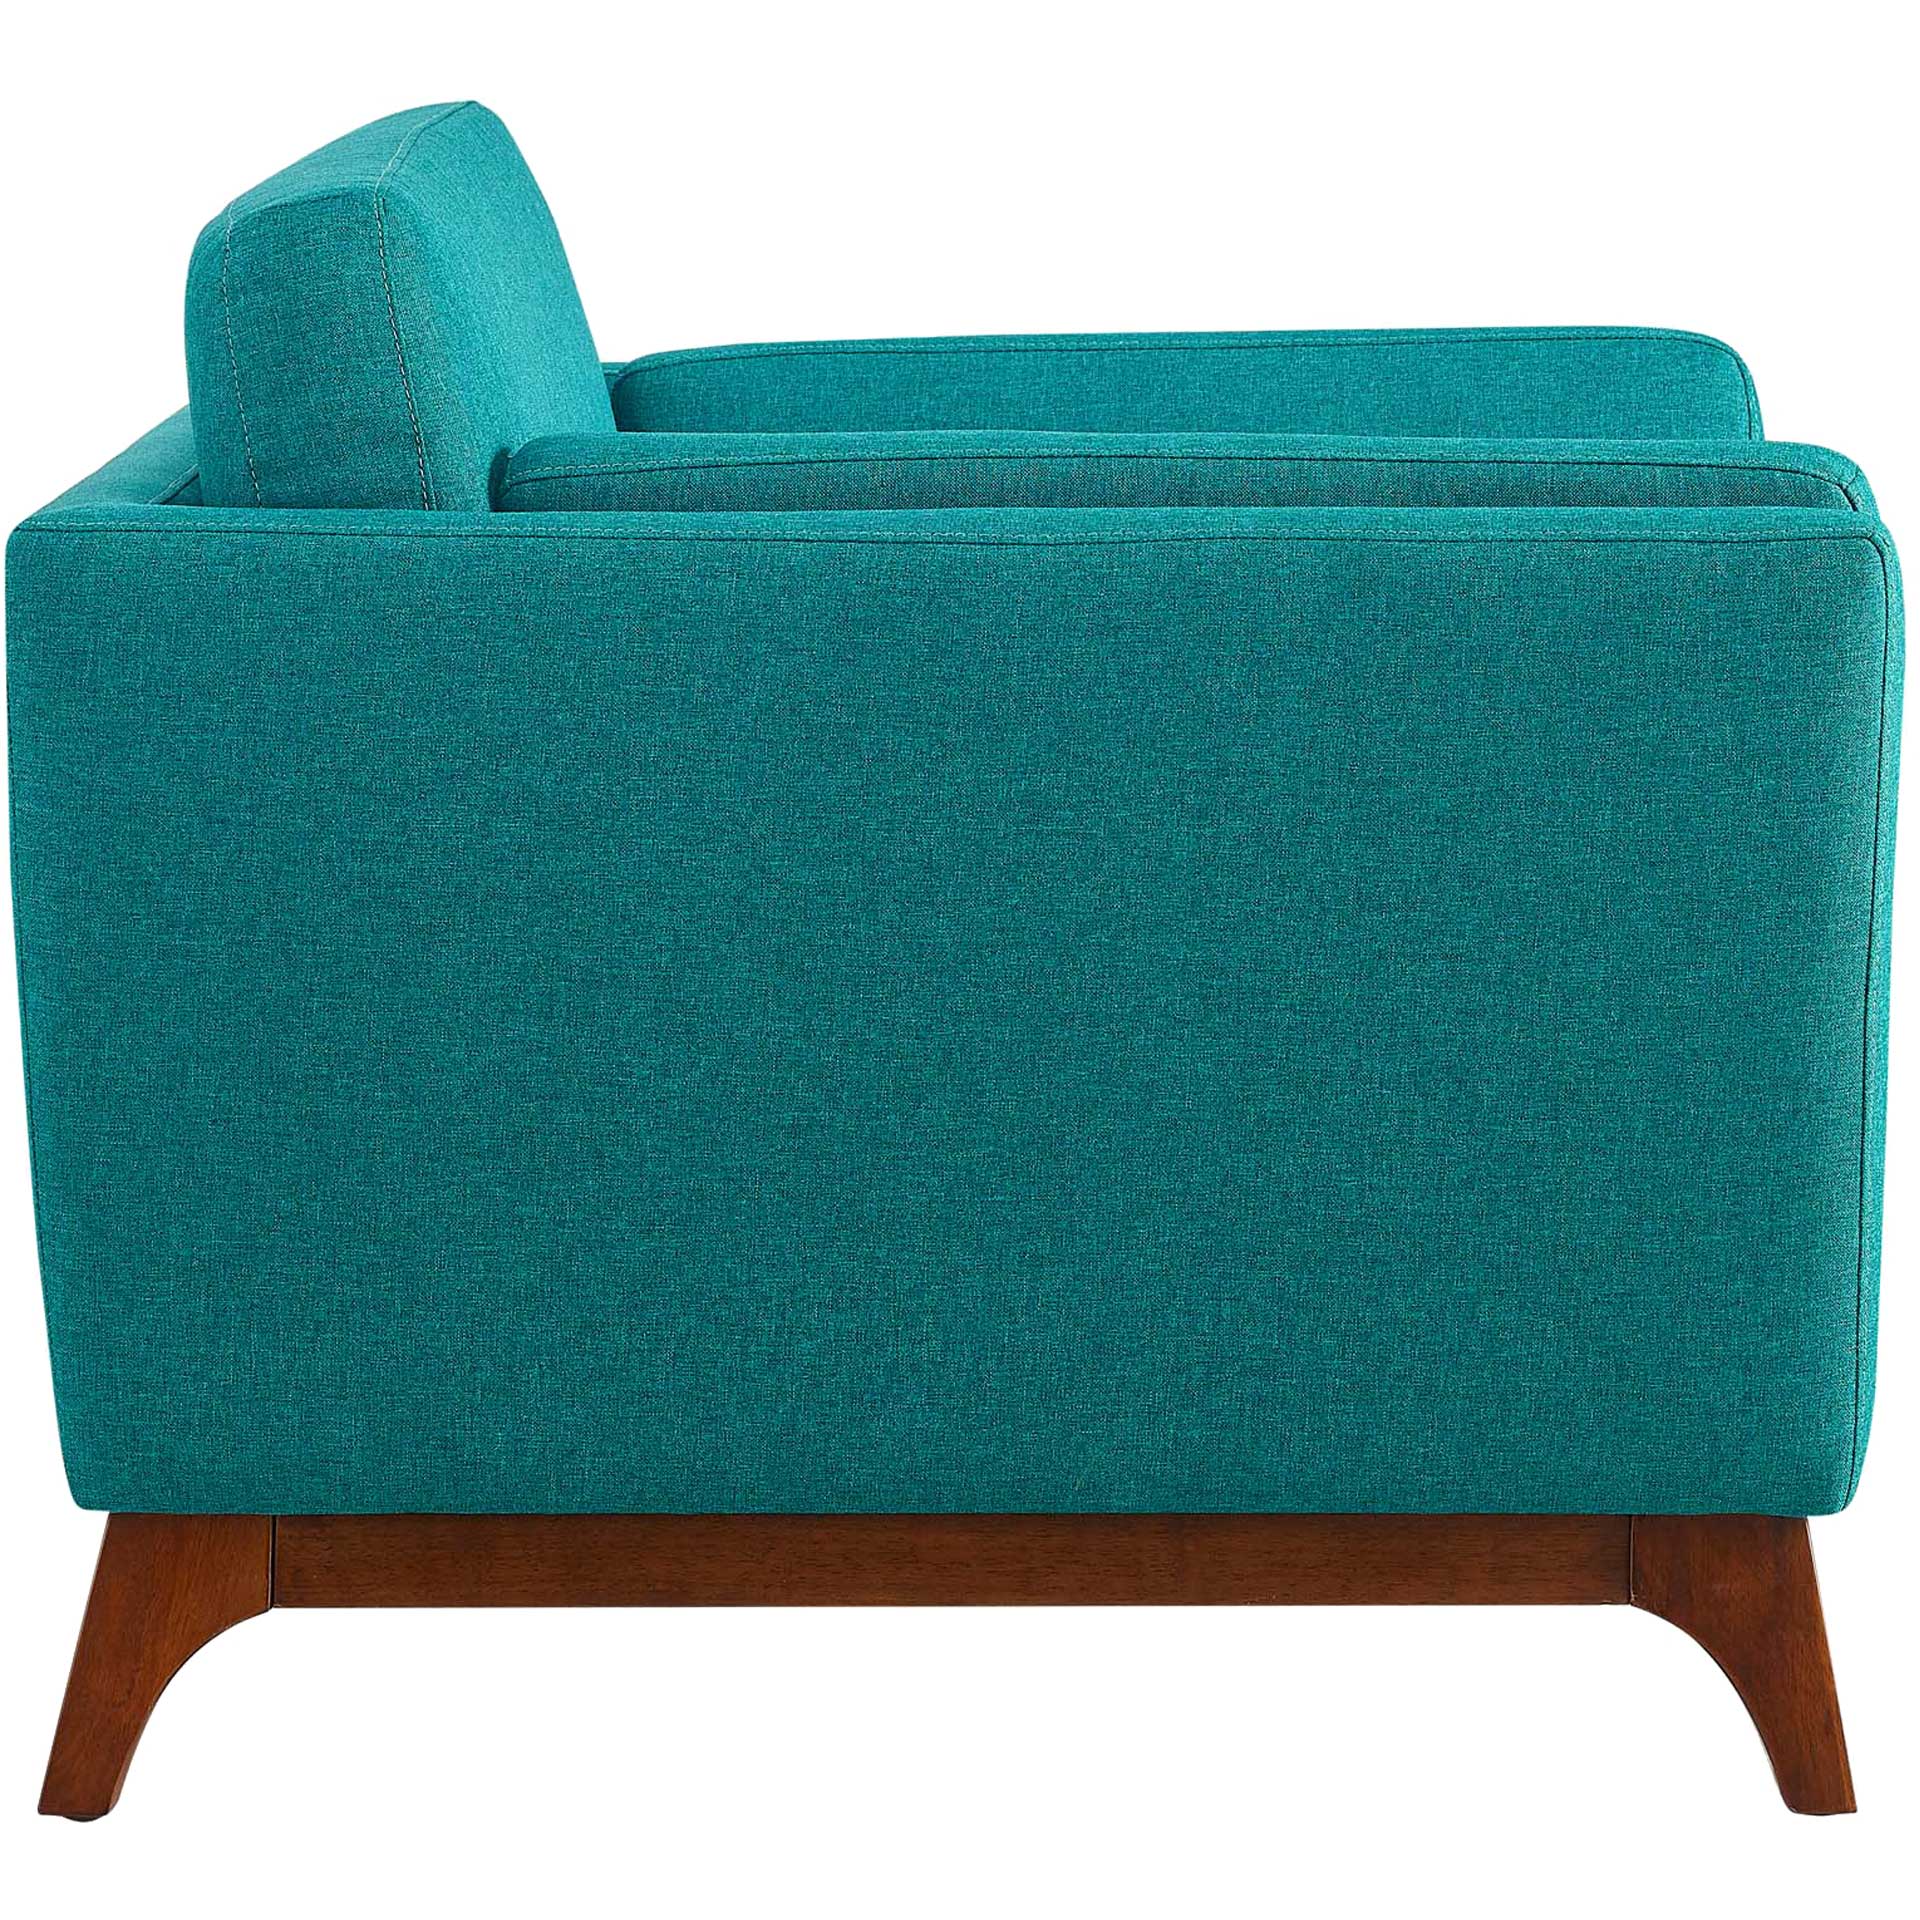 Casa Upholstered Fabric Armchair Teal